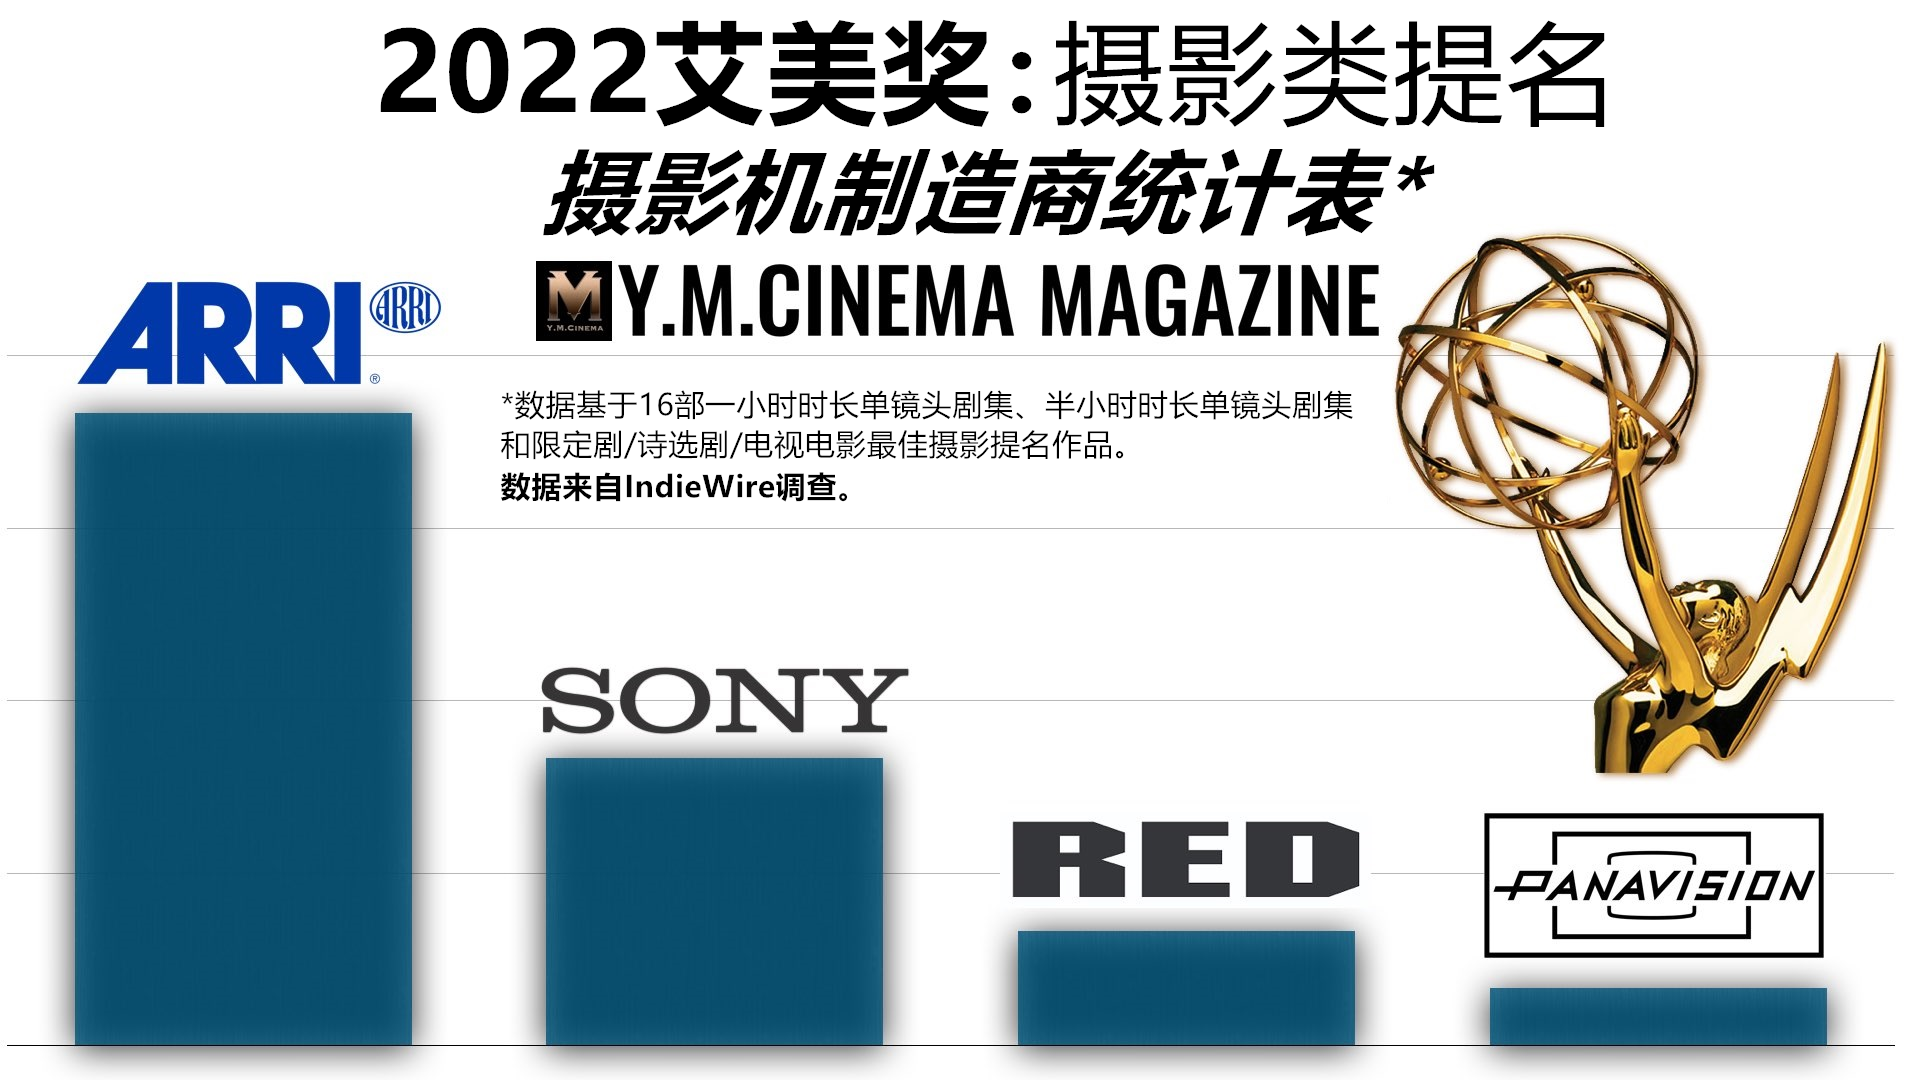 The-Cameras-Behind-Emmys-2022-Sony-VENICE-Goes-Head-to-Head-With-ARRI-Mini.004_副本